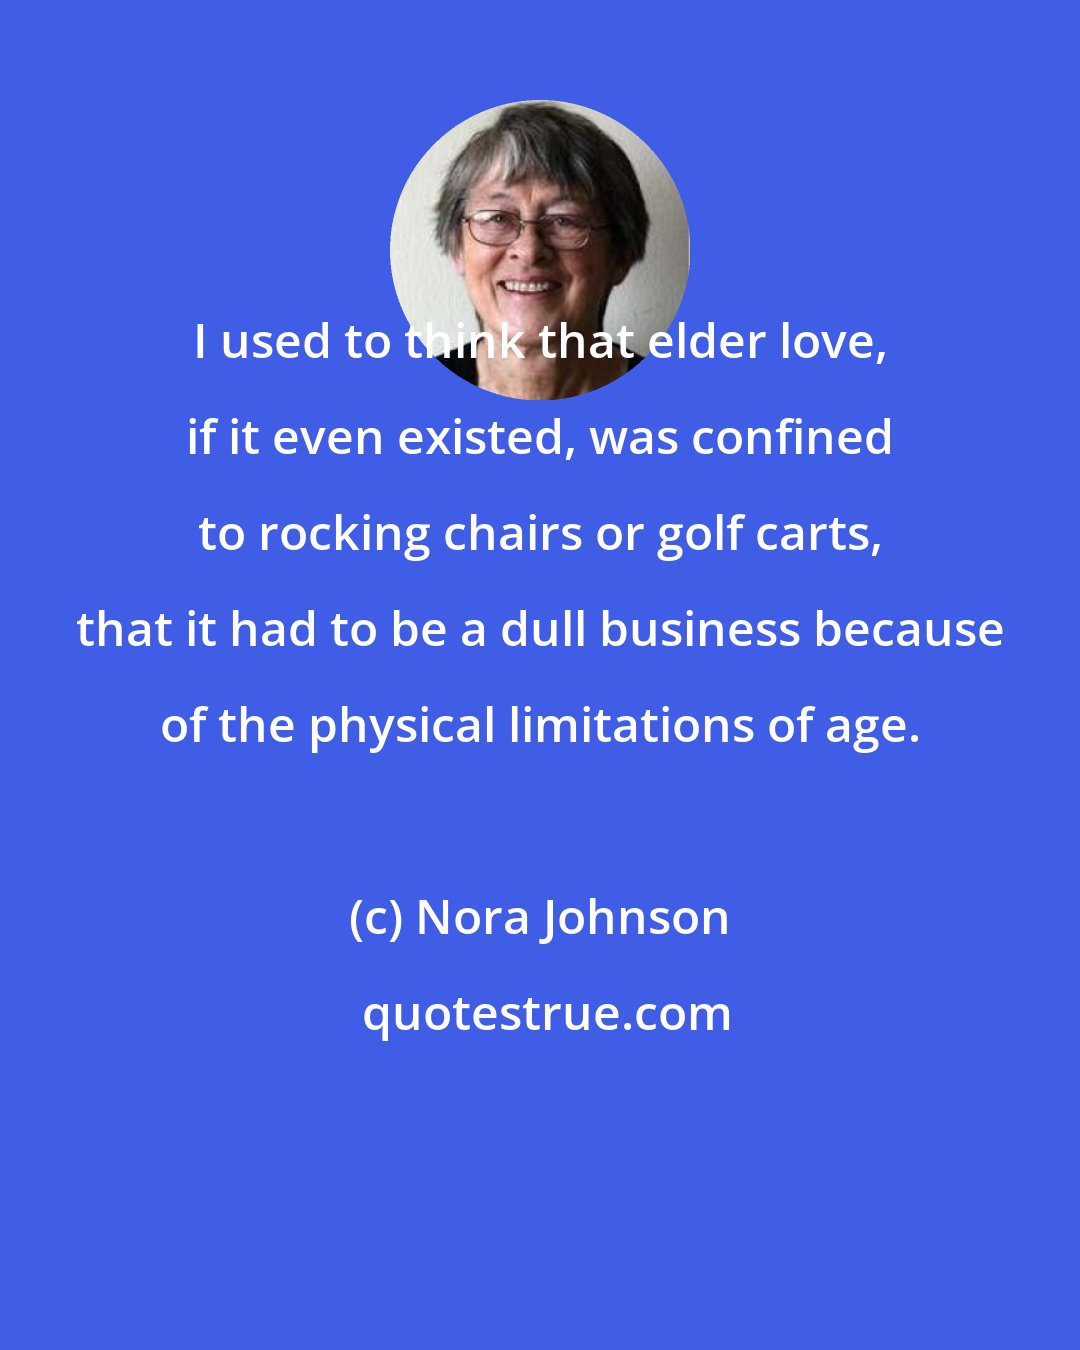 Nora Johnson: I used to think that elder love, if it even existed, was confined to rocking chairs or golf carts, that it had to be a dull business because of the physical limitations of age.